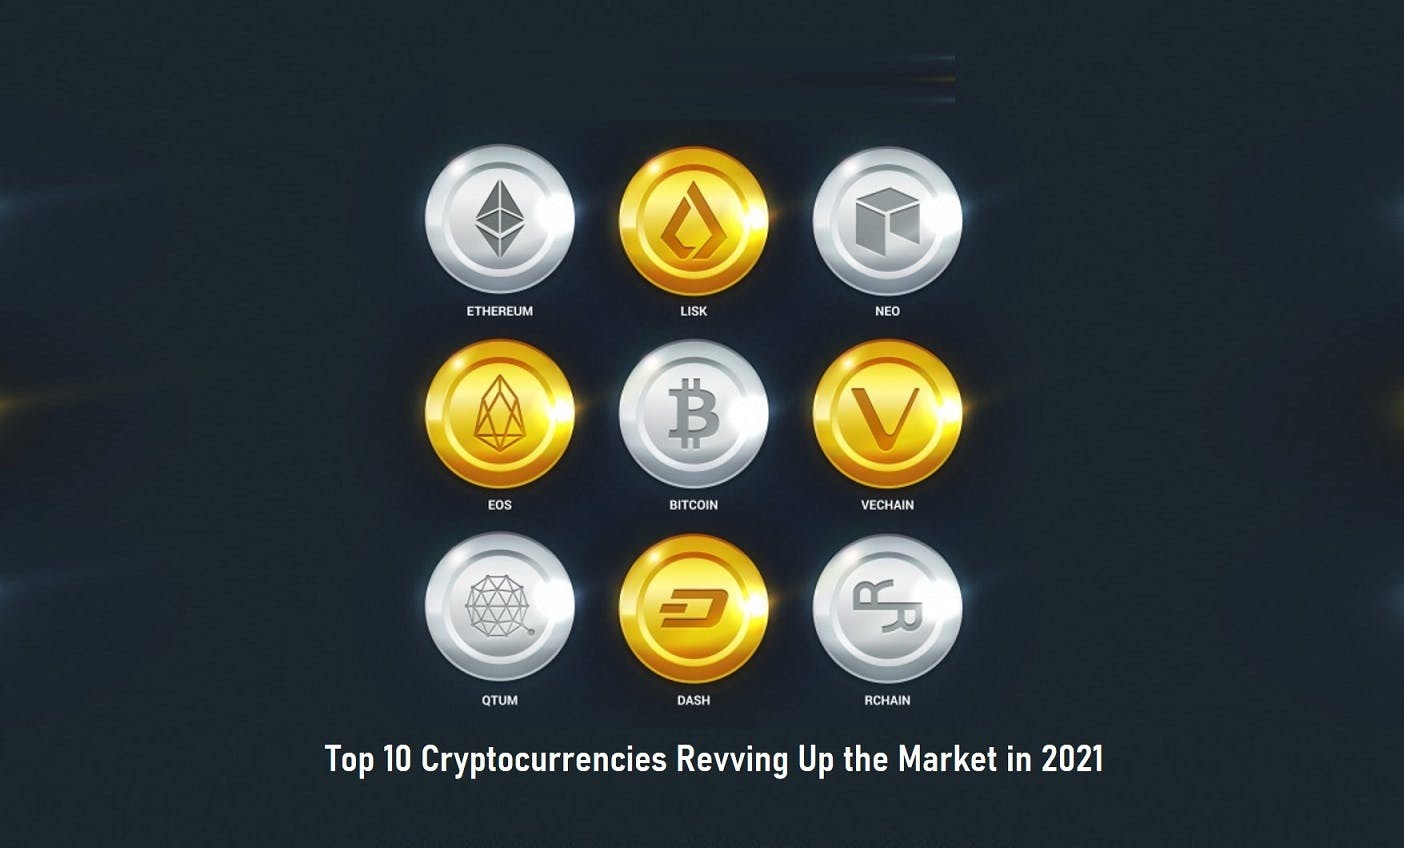 Top 10 Cryptocurrencies Revving Up the Market in 2022